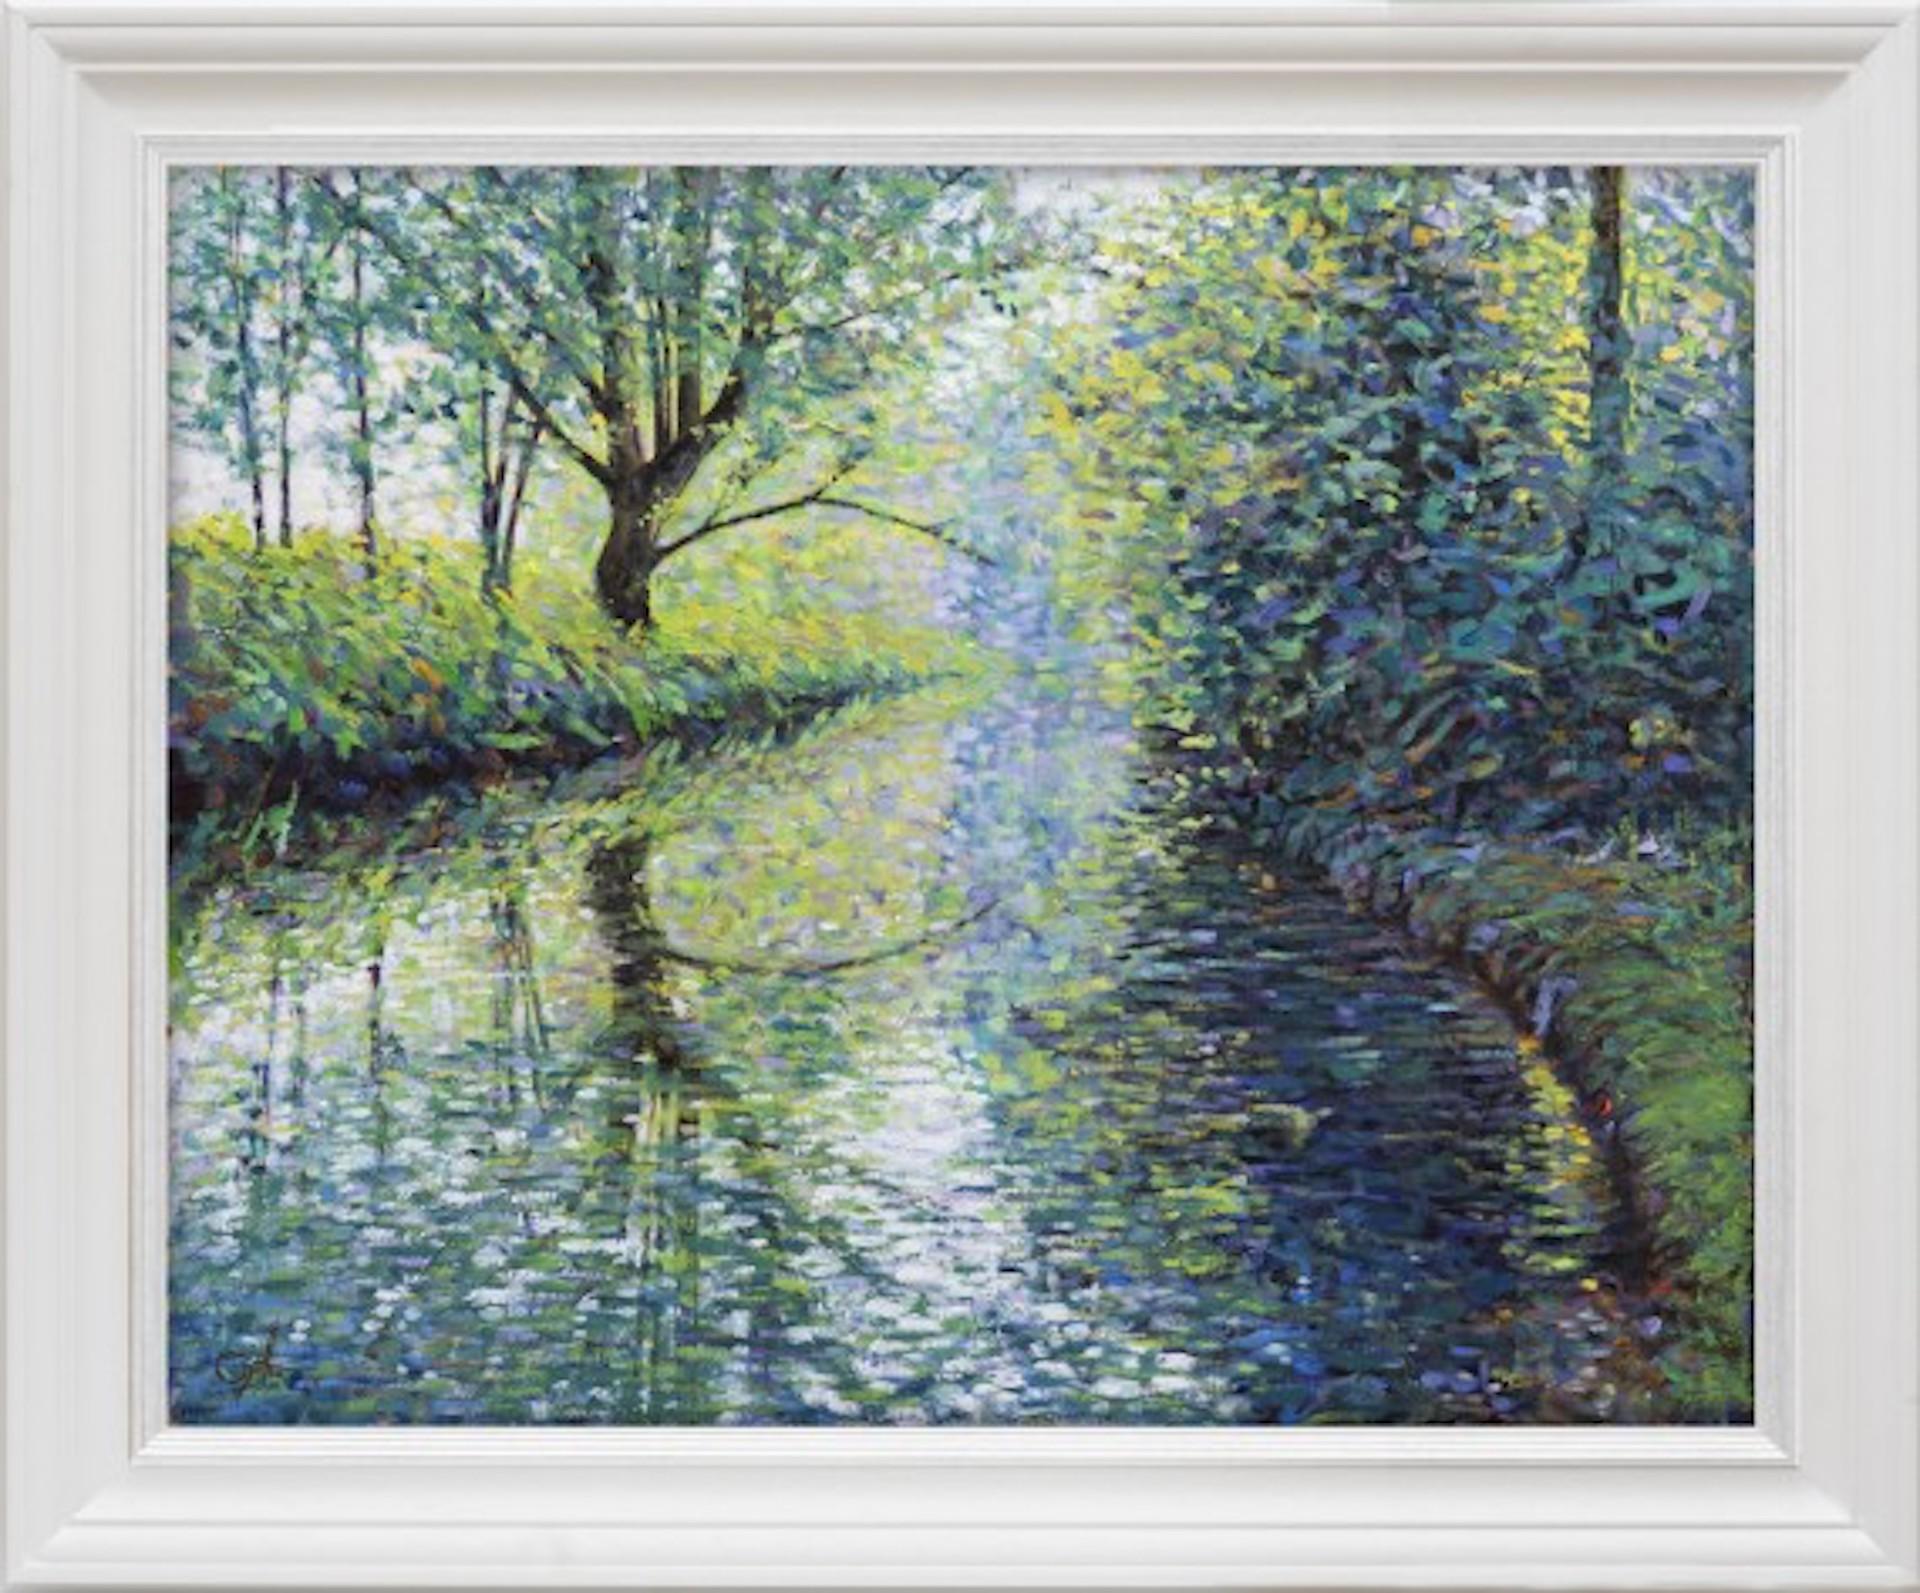 Call of the Kingfisher [2020]
original

Oil on stretched canvas

Image size: H:61 cm x W:76 cm

Complete Size of Unframed Work: H:61 cm x W:76 cm x D:1.8cm

Sold Unframed

Please note that insitu images are purely an indication of how a piece may